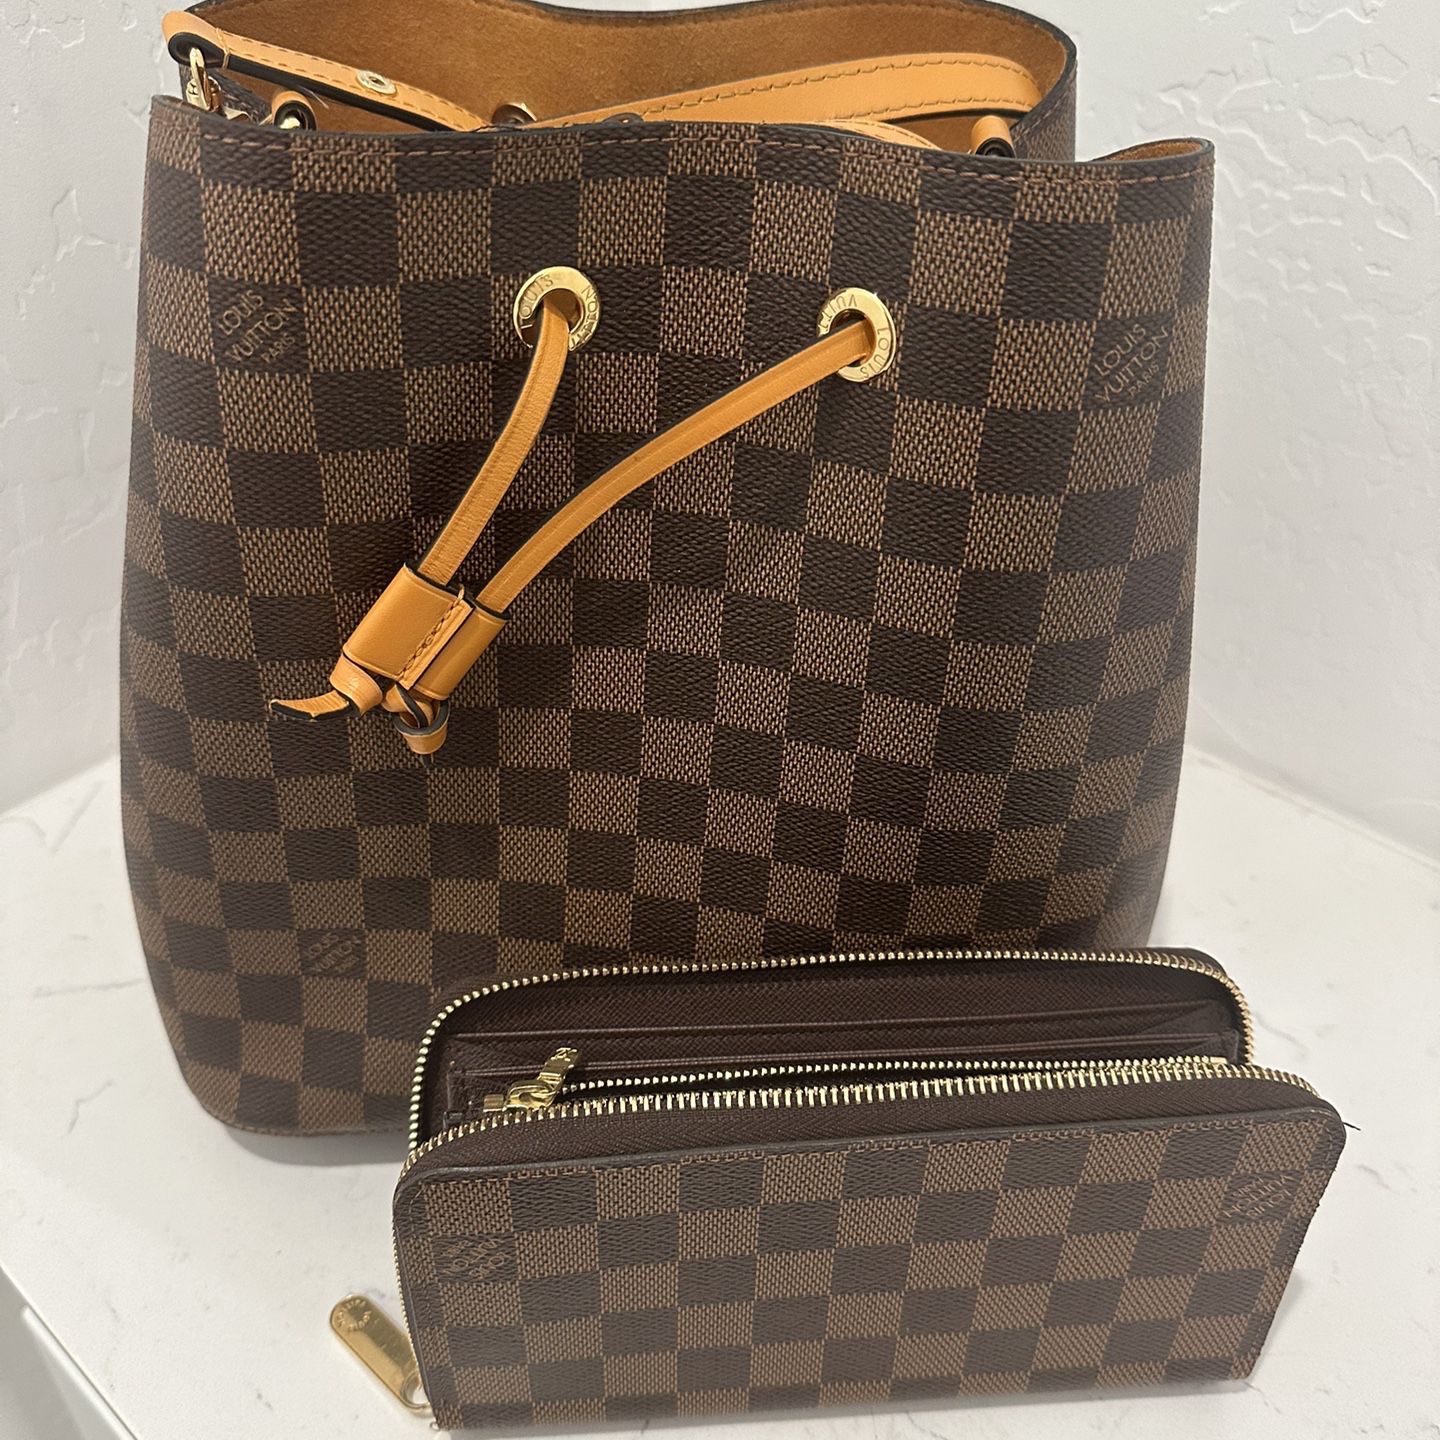 Authentic Louis Vuitton Purse and Wallet for Sale in Gilbert, AZ